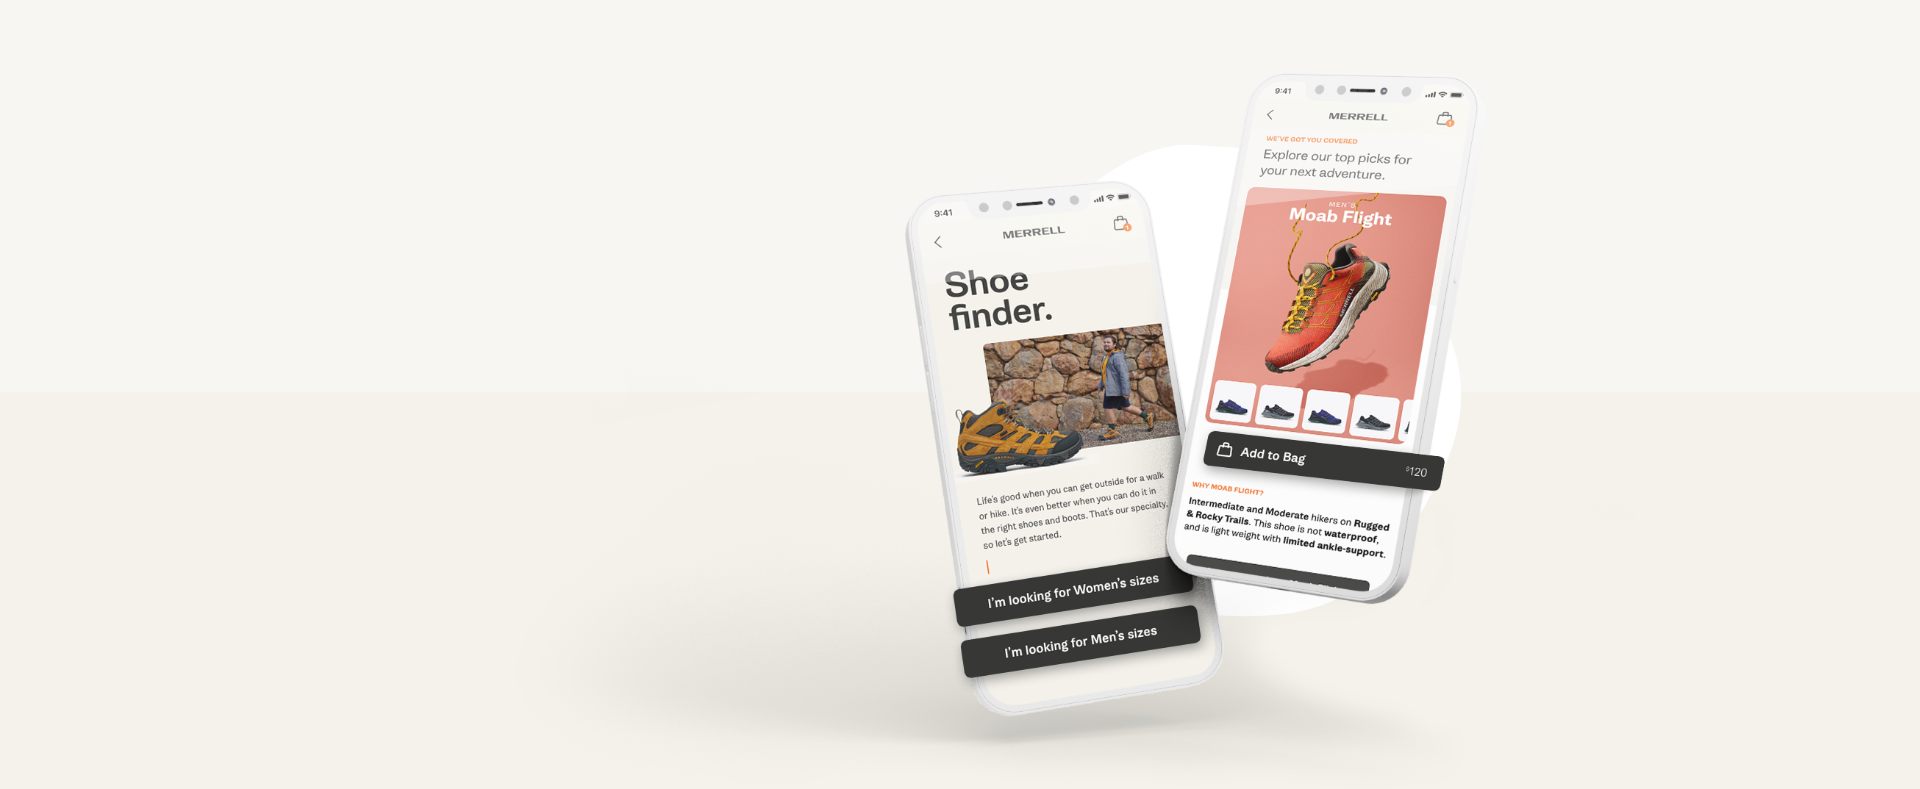 Merrell App - Find the Perfect Hiking Shoe | Merrell